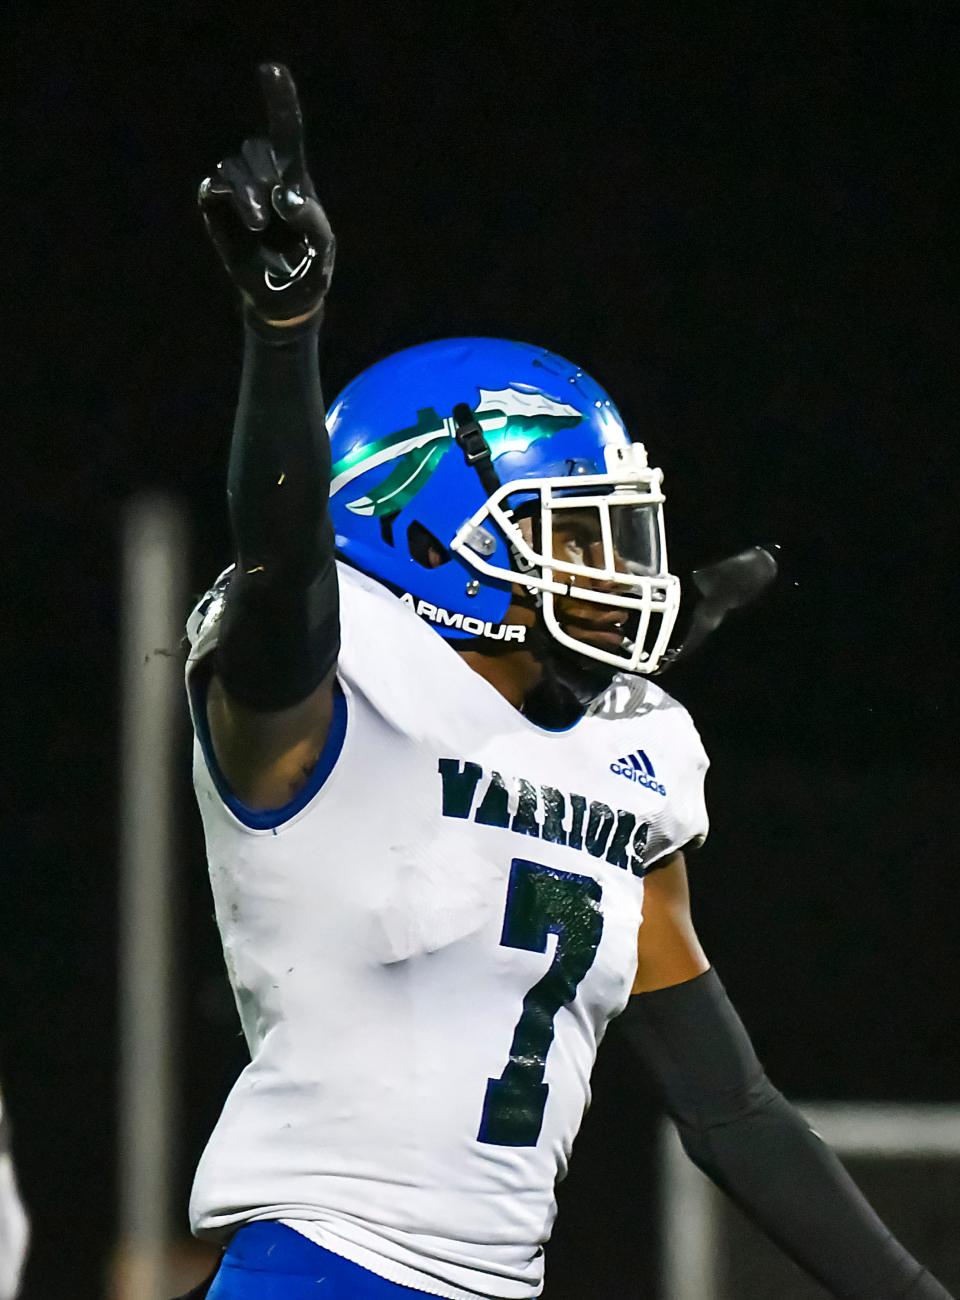 Winton Woods' Jermaine Mathews Jr. is the No. 10 recruit in Ohio for the Class of 2023, per 247sports.